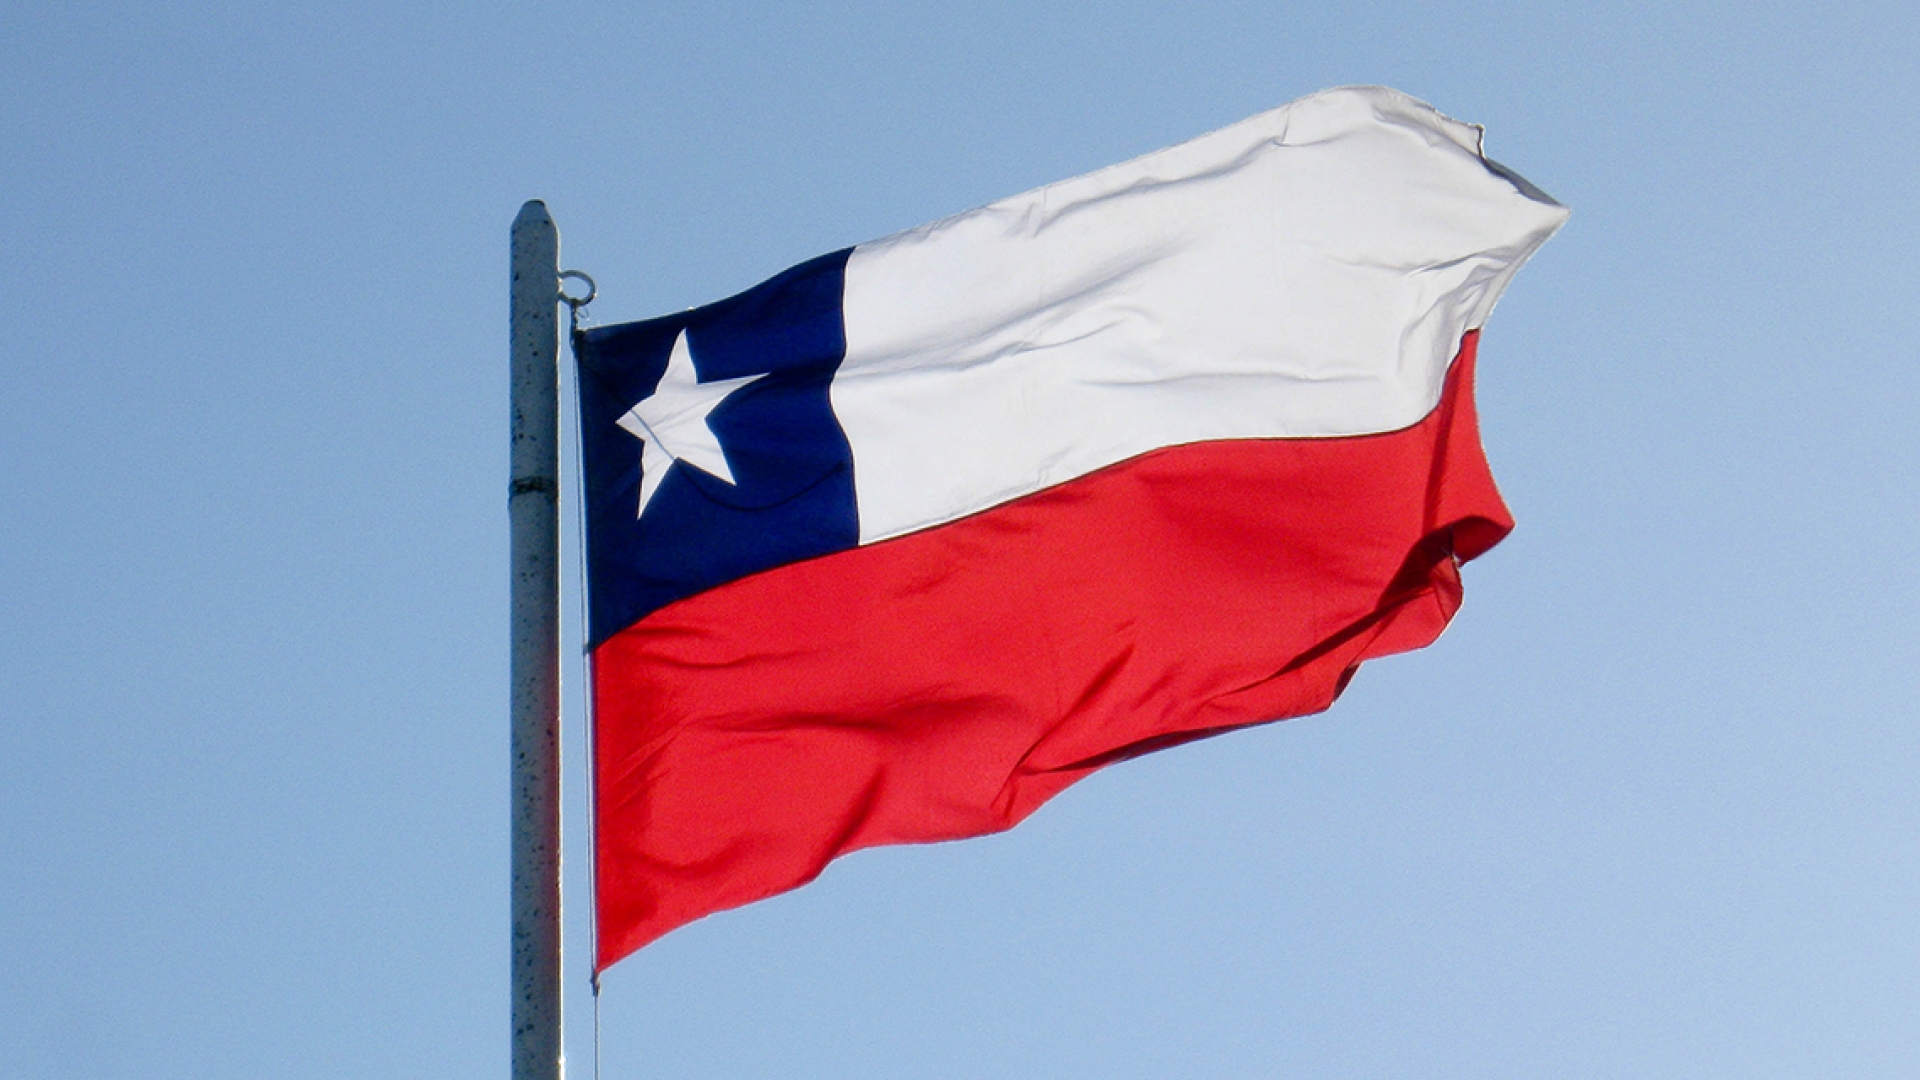 IAEA Mission Says Chile Committed to Enhancing Safety, Sees Regulatory Challenges | IAEA